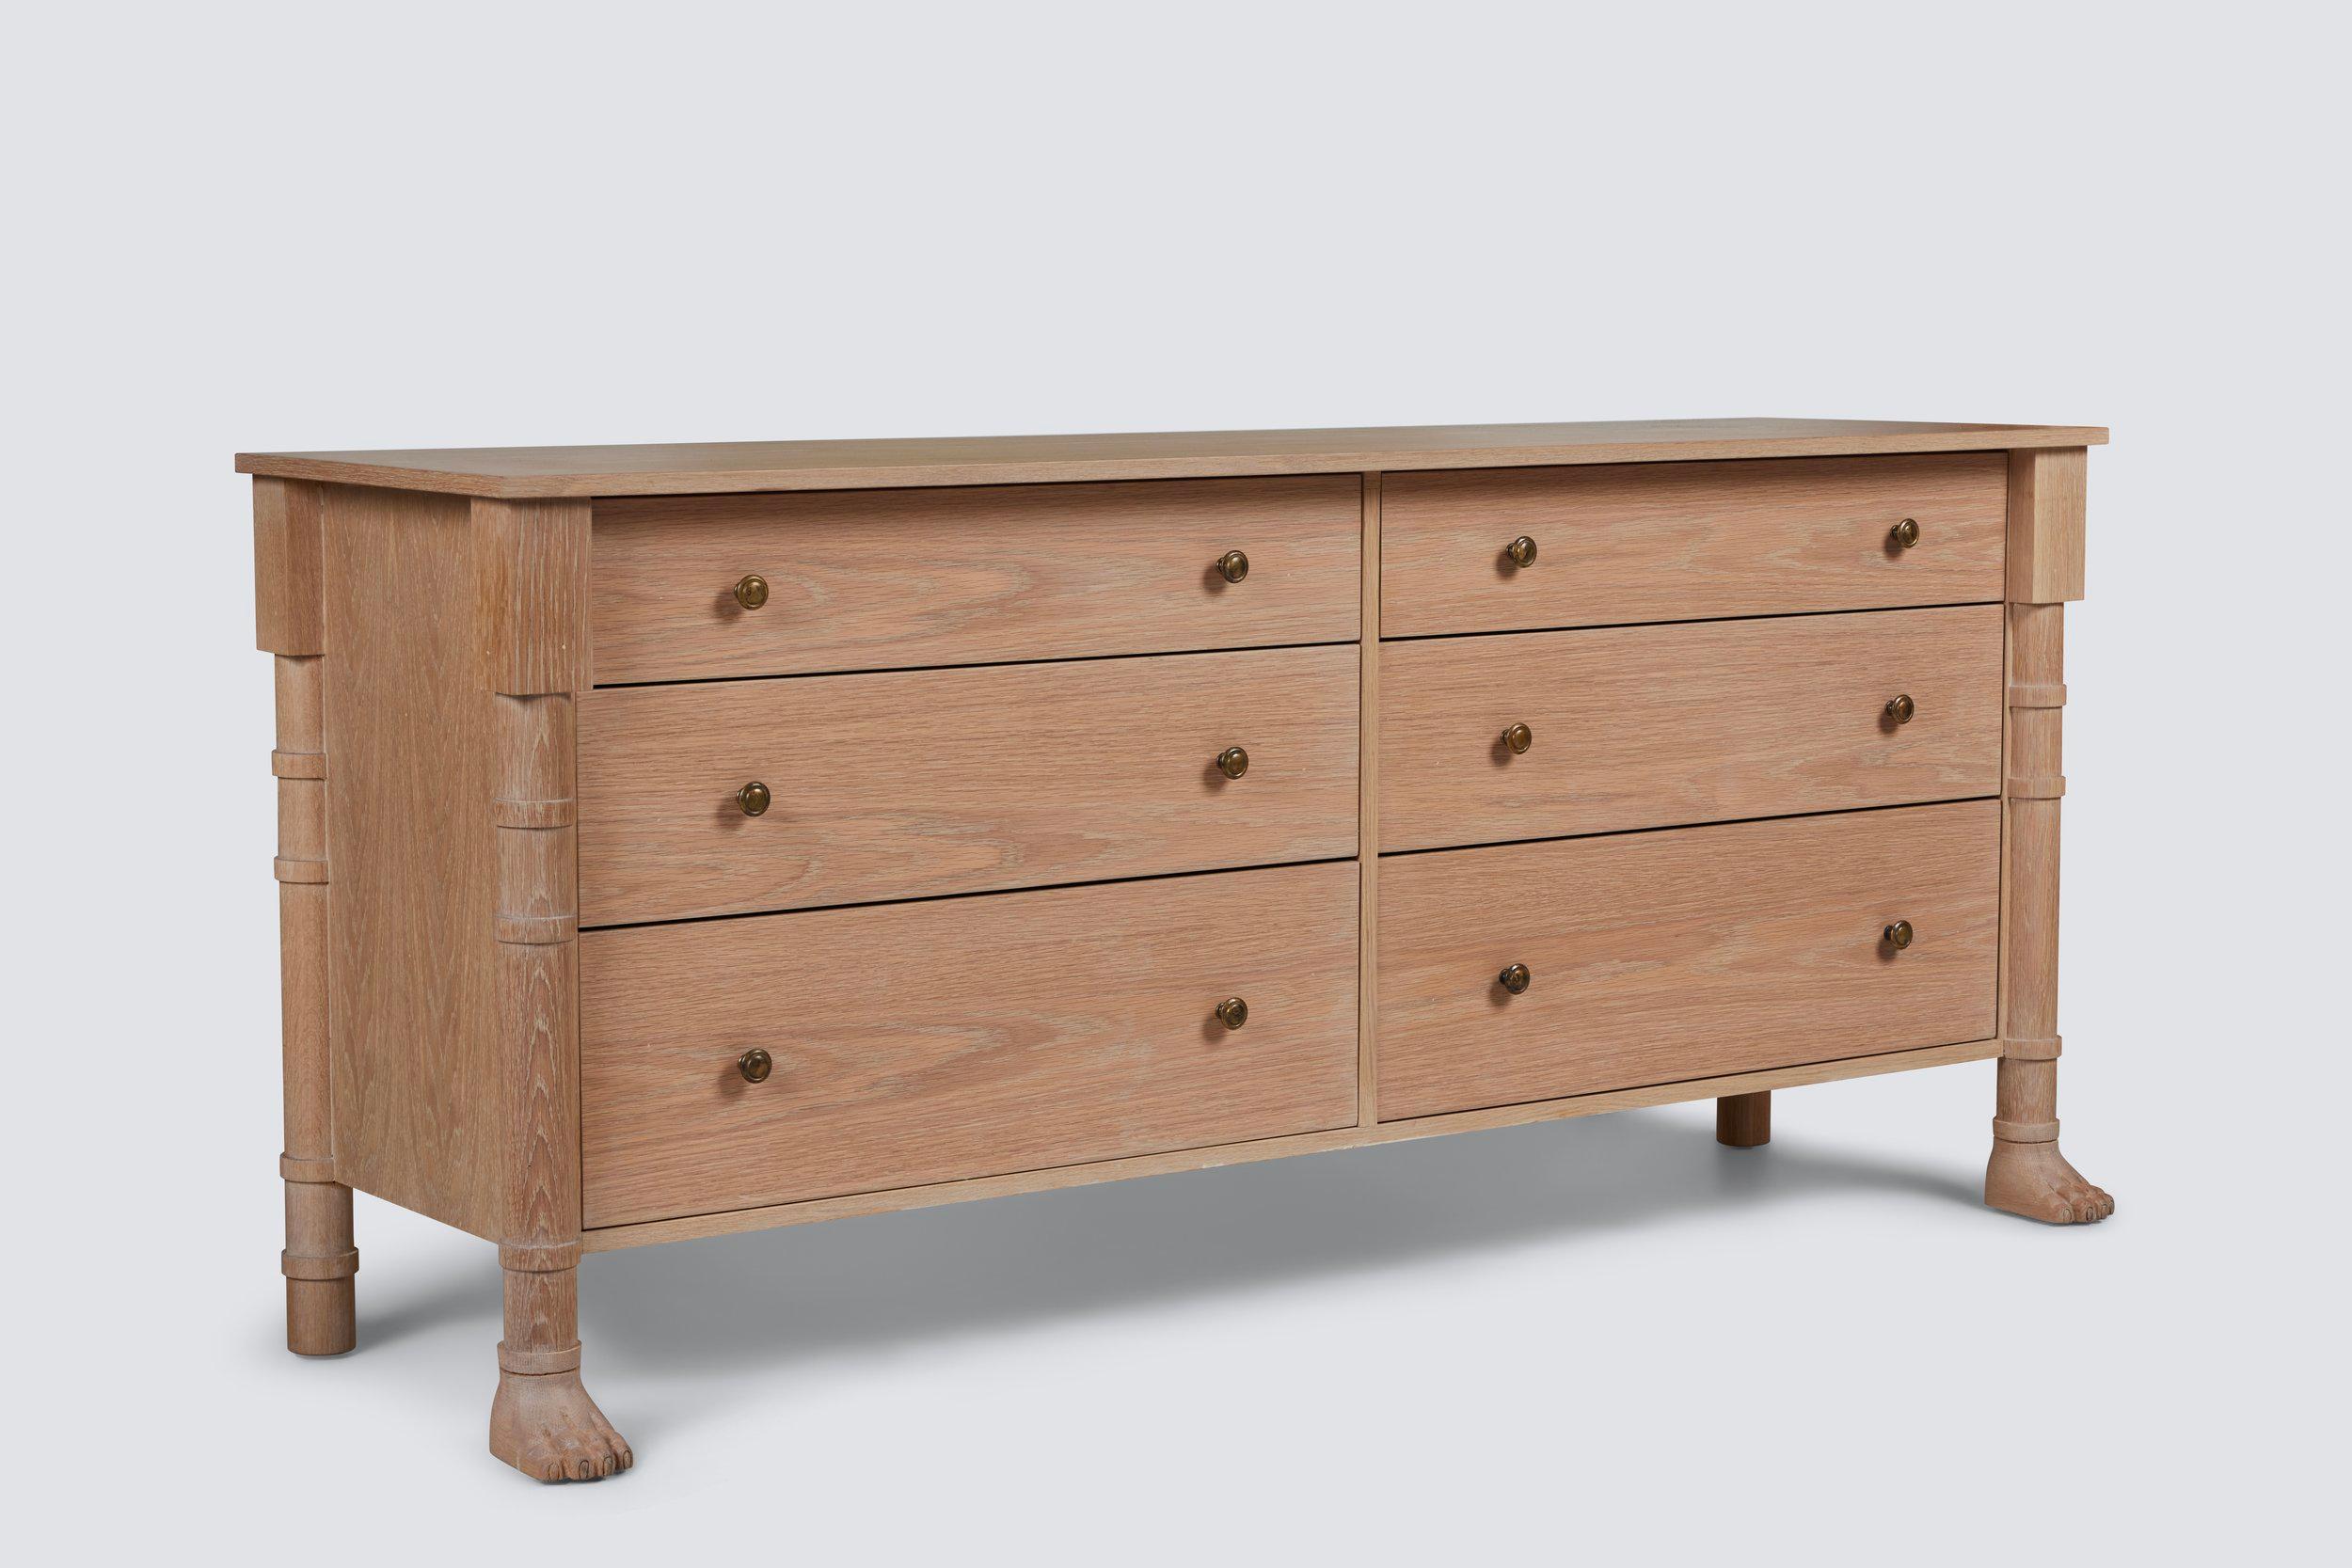 Martin & Brockett’s Lupa Dresser 72” features the Lupa Collection’s signature hand carved Lupa Feet, as well as turned details and 6 drawers, increasing in size from top to bottom.

72” L x 32” H x 20.5” D

Part of M&B’s Lupa Collection.

Available